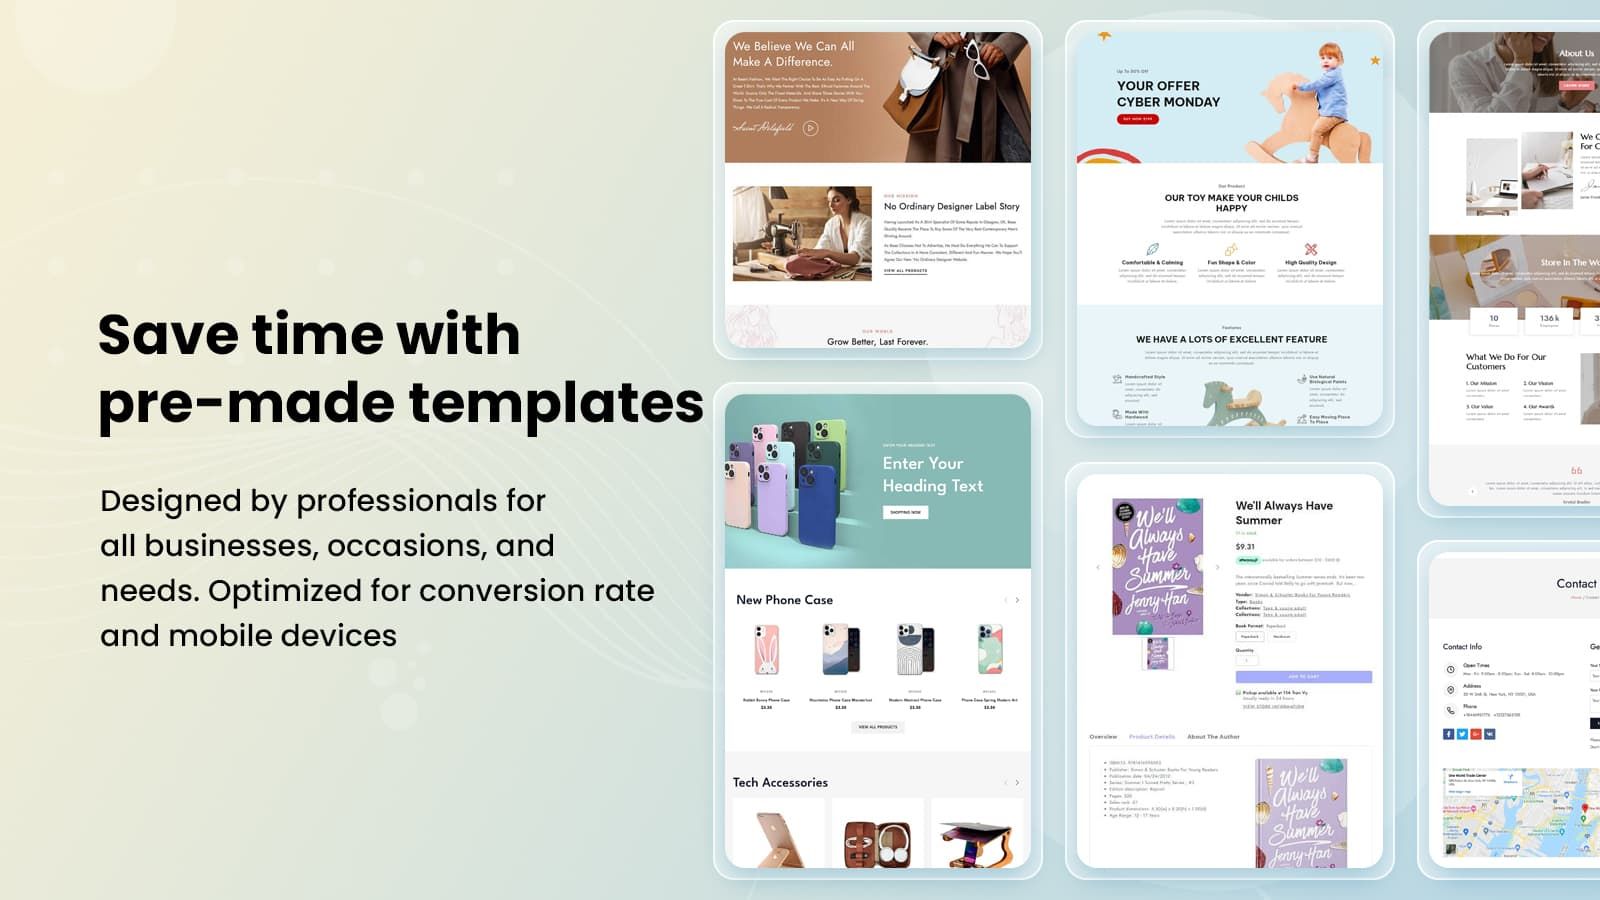 More than 400 high-converting templates and page layouts